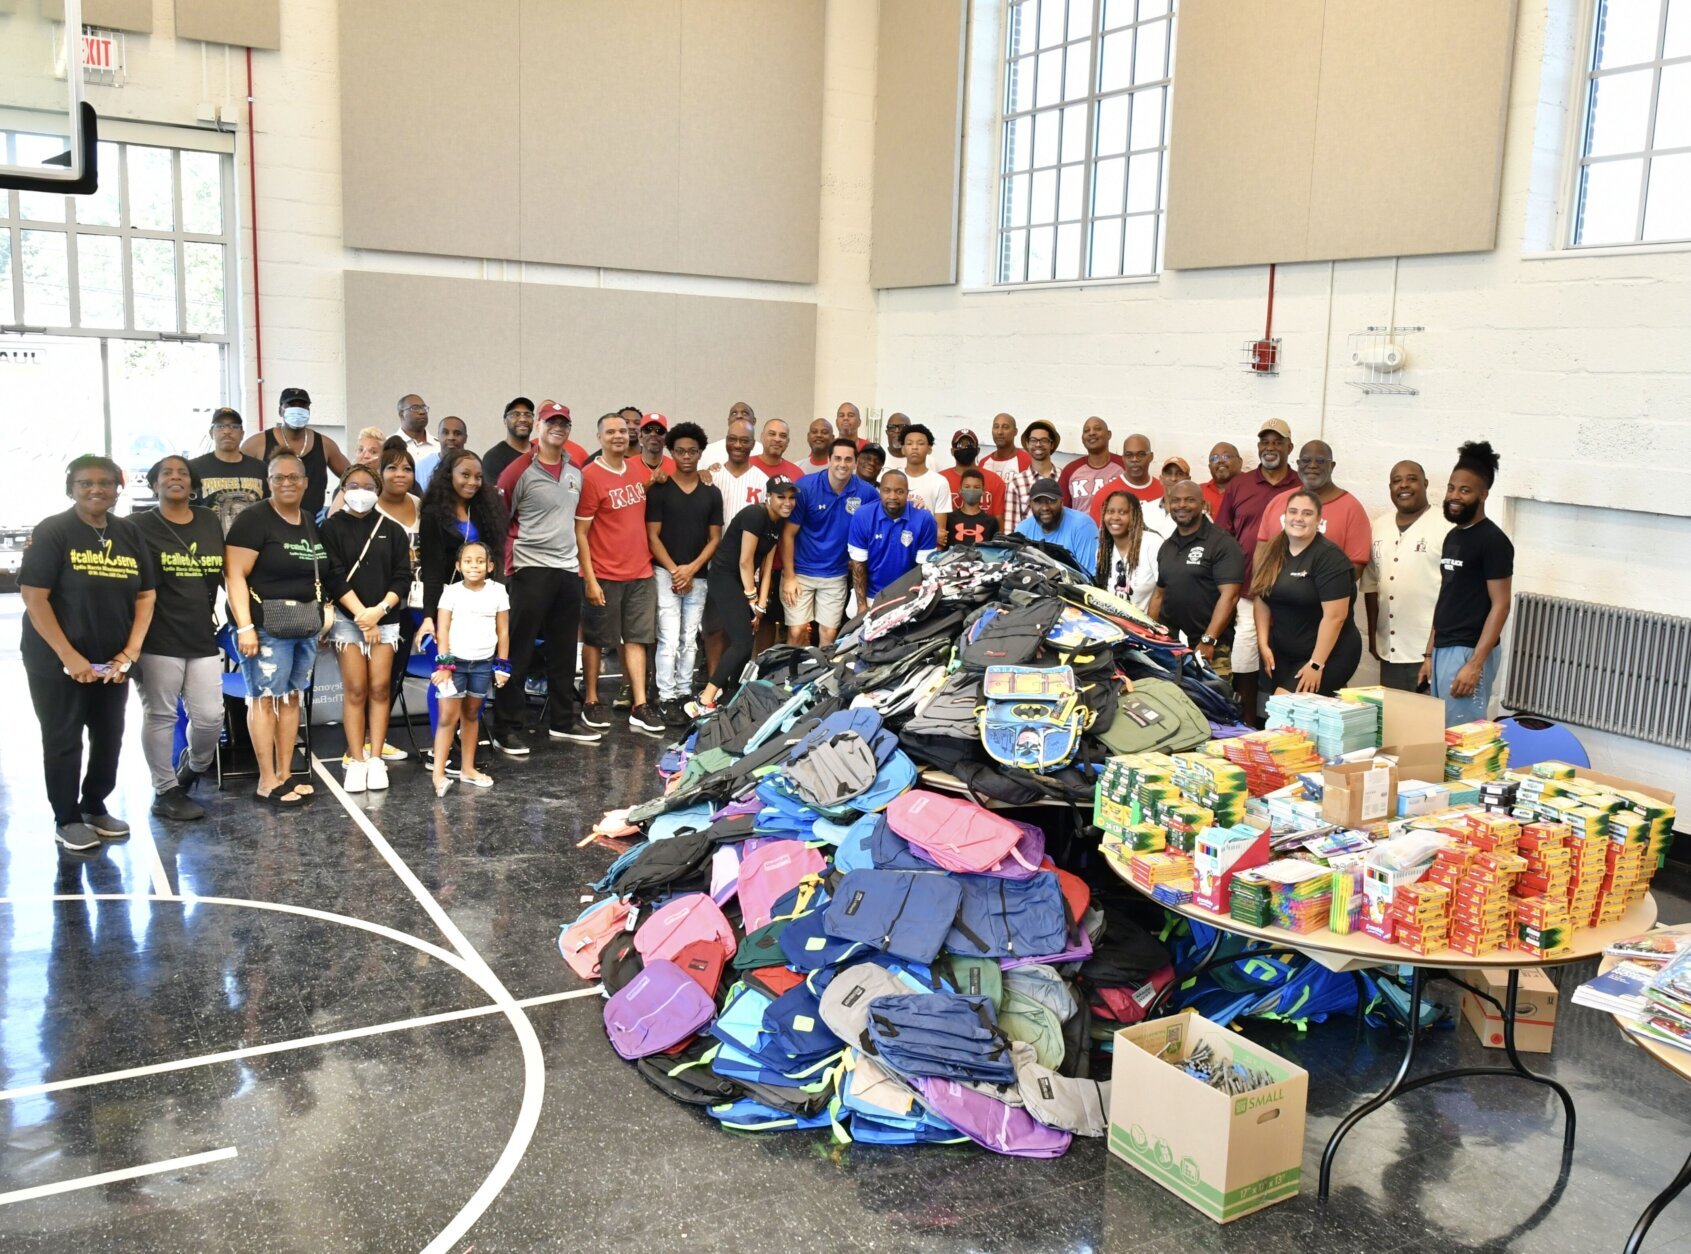 Volunteers help fill bags with school supplies at the "Stuff the Backpack" event on Saturday.